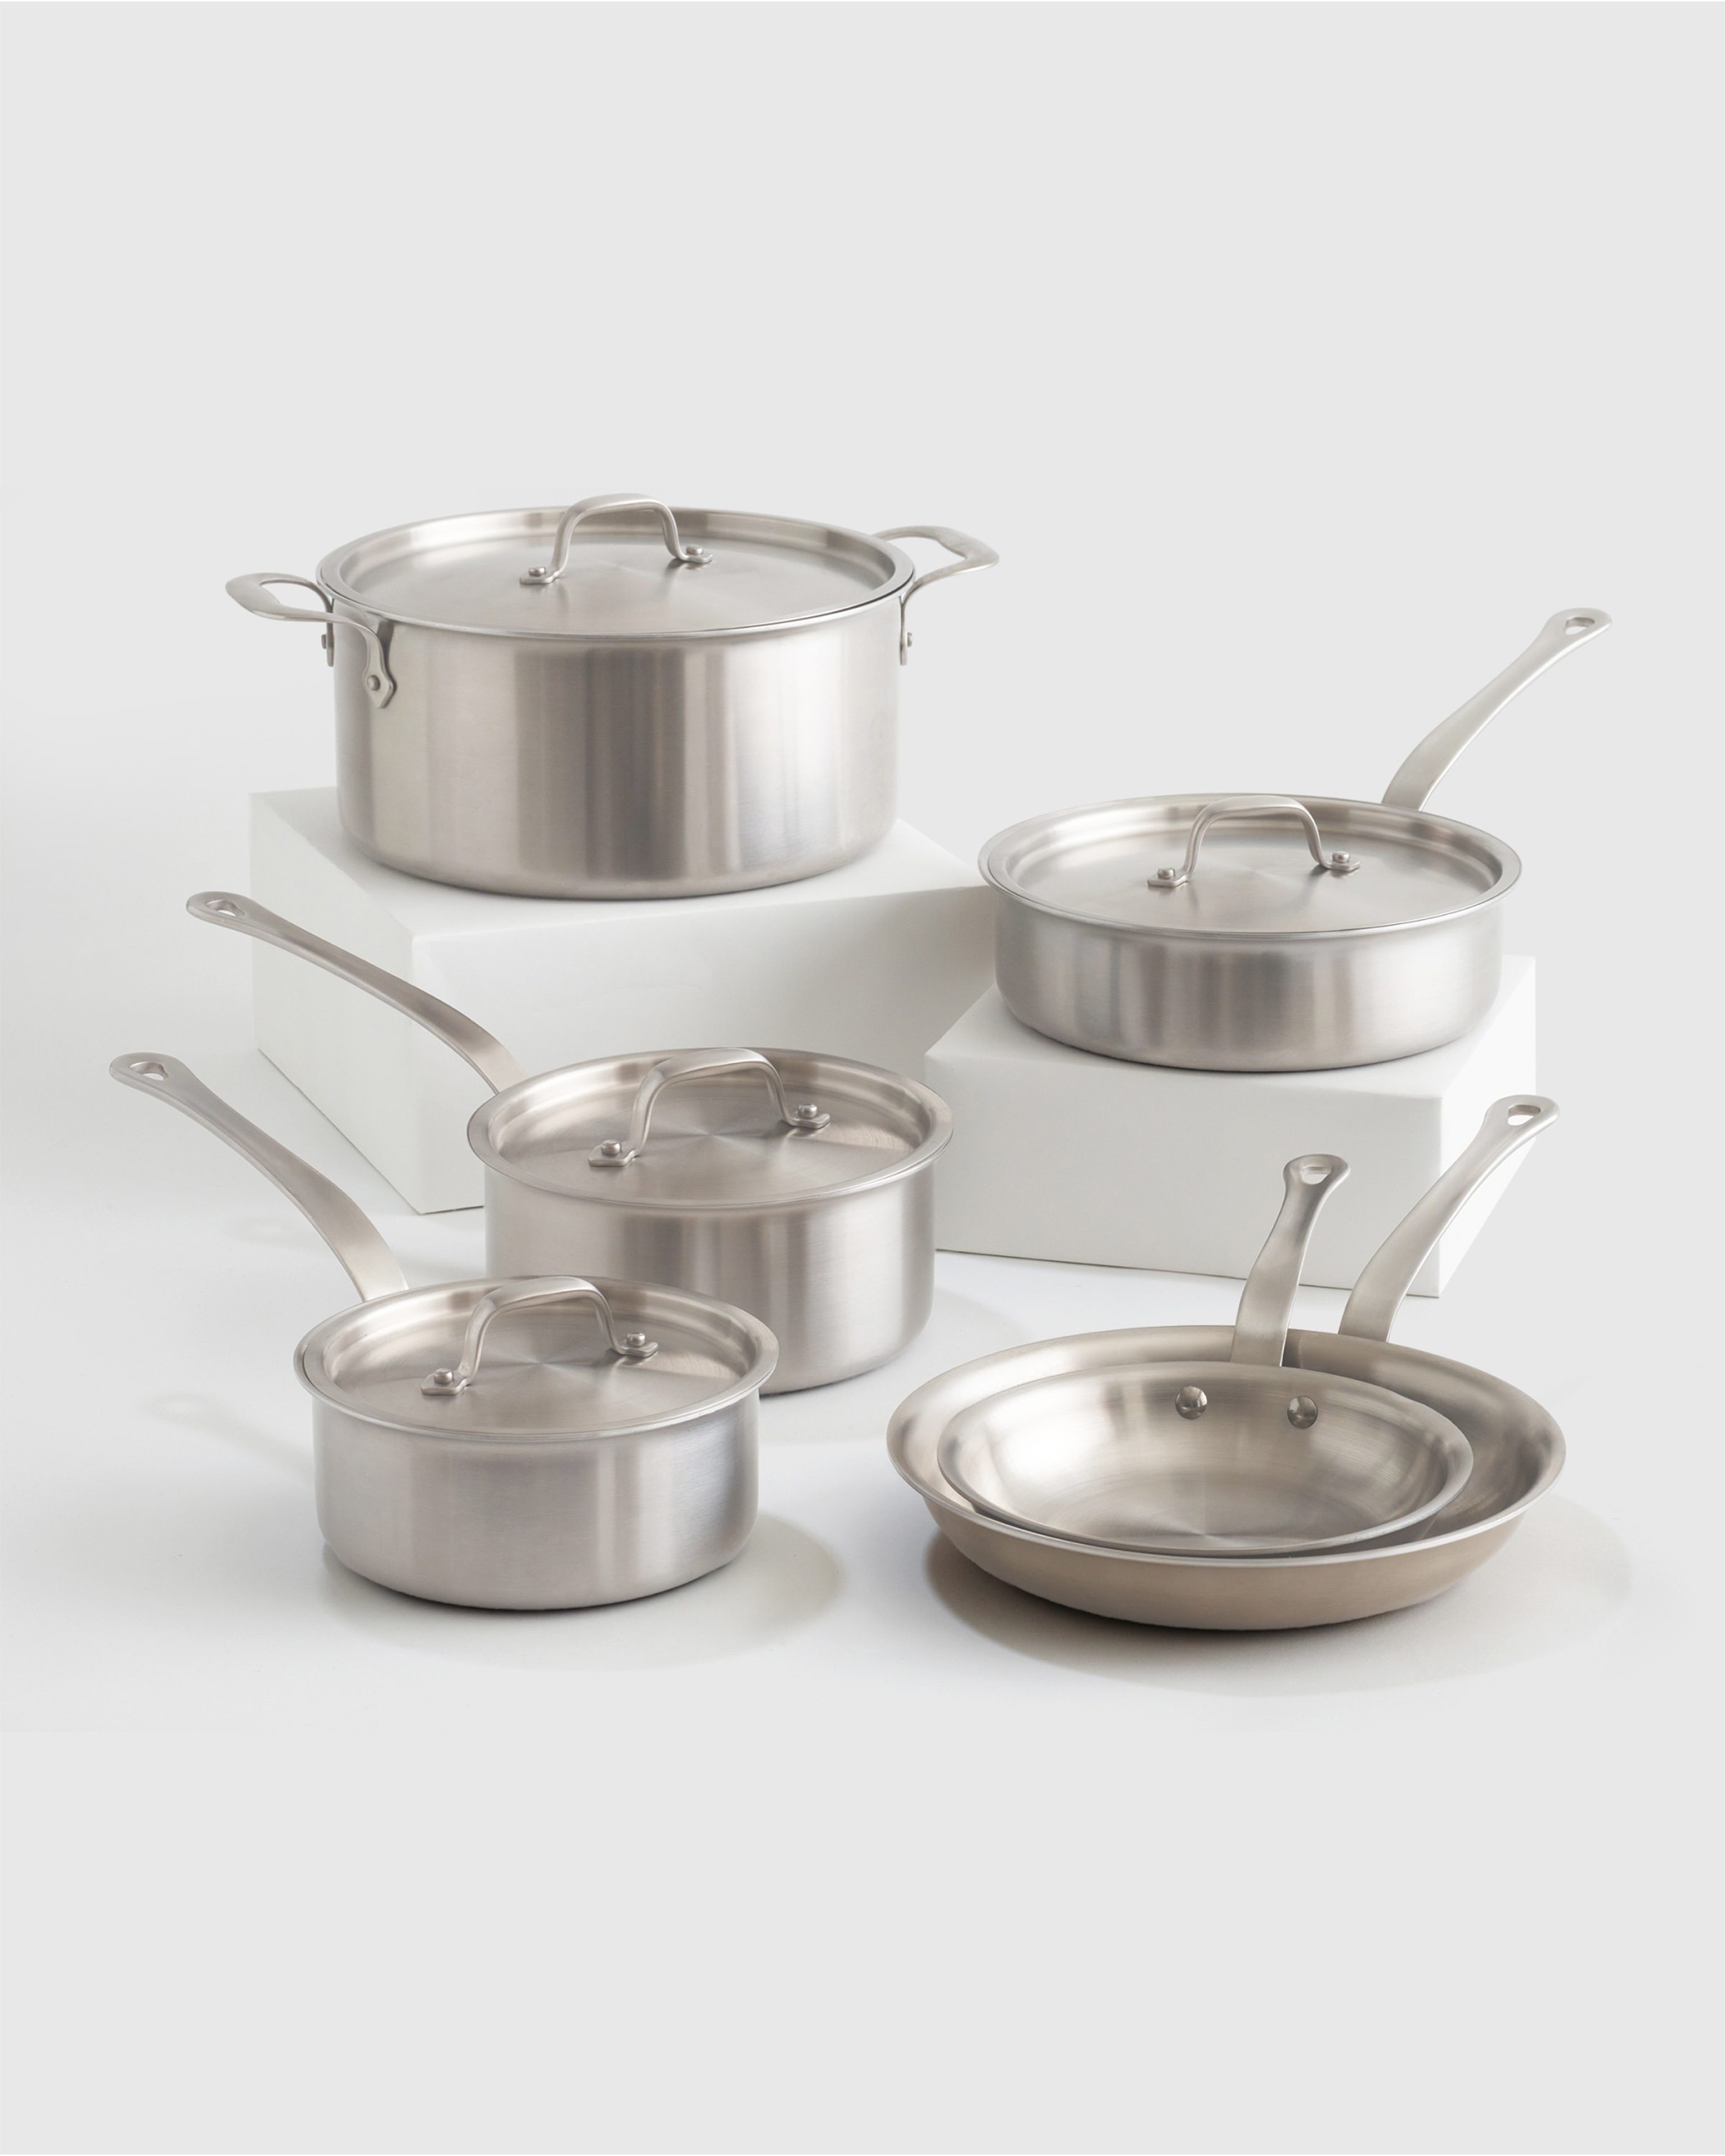 This Cuisinart Saucepan 'Compares Beautifully' to Restaurant-Grade Cookware,  and It's 56% Off